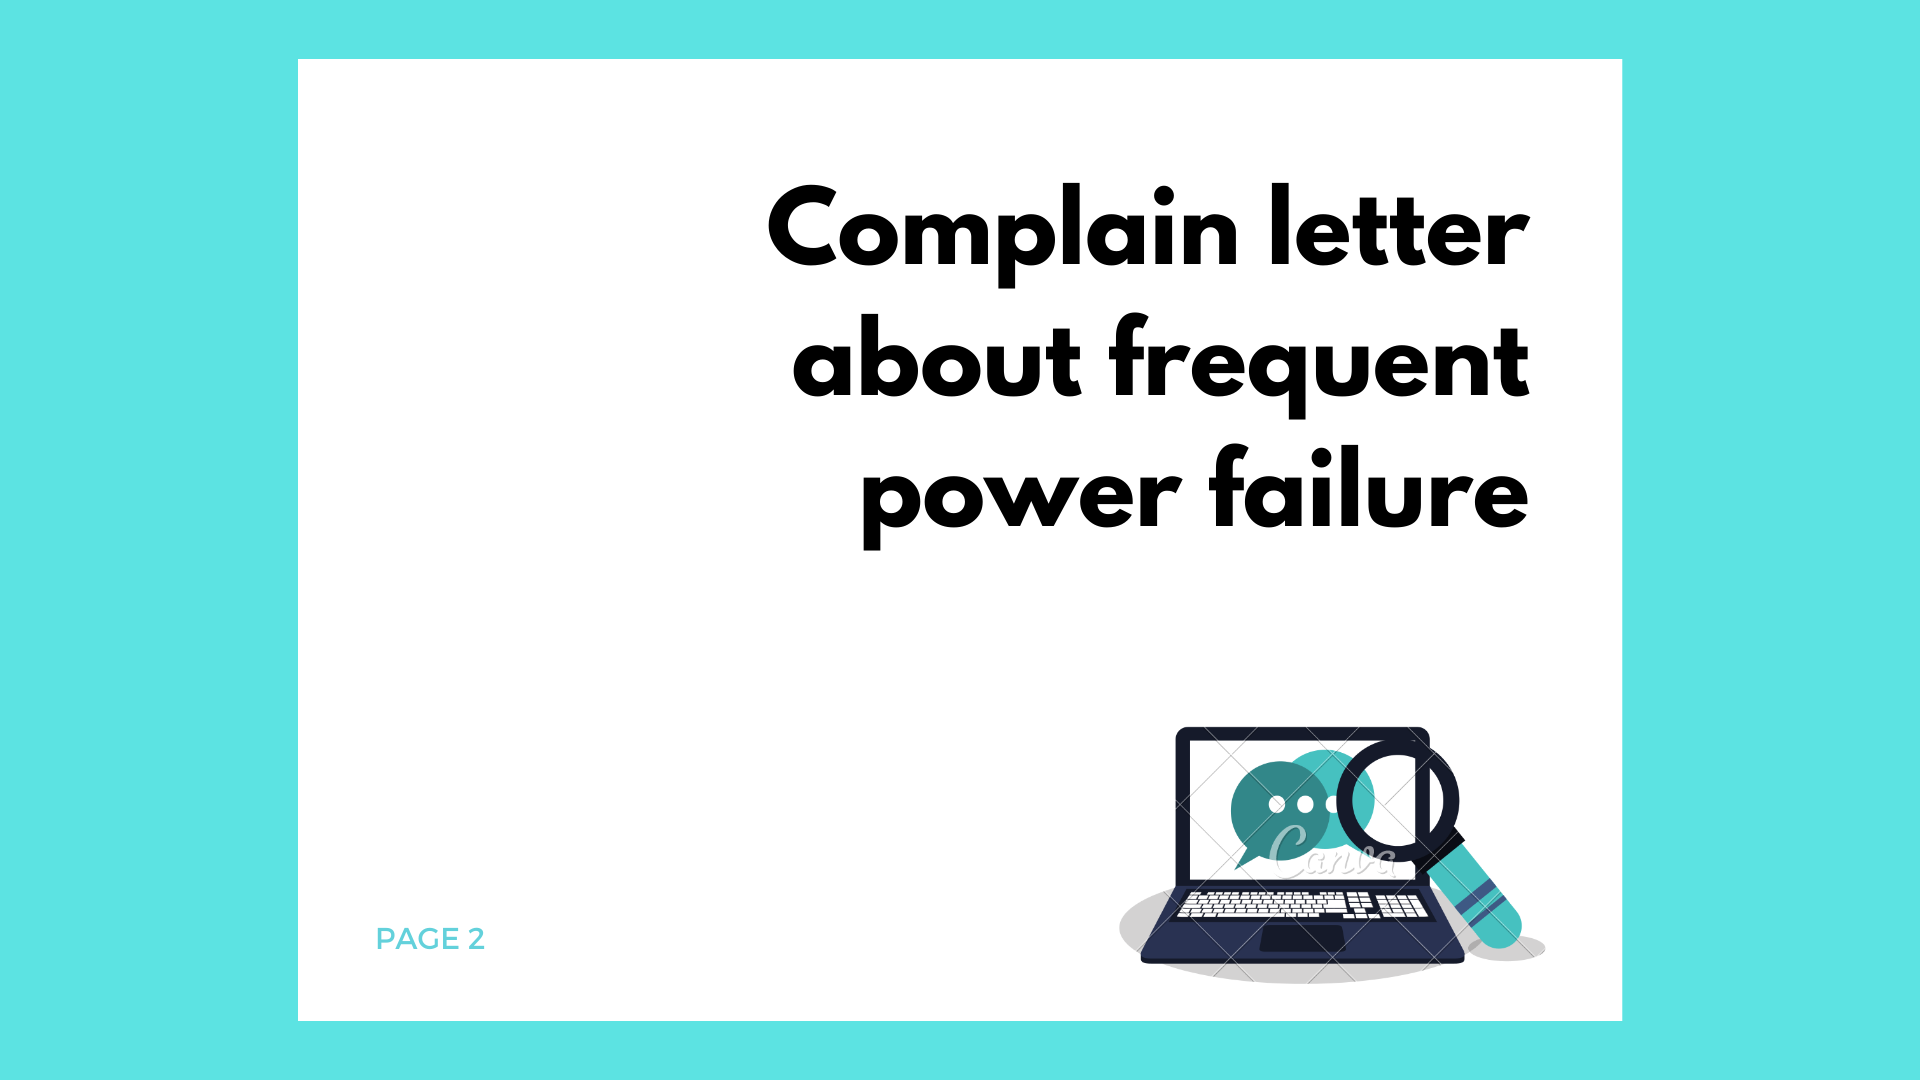 Complain letter about frequent power failure